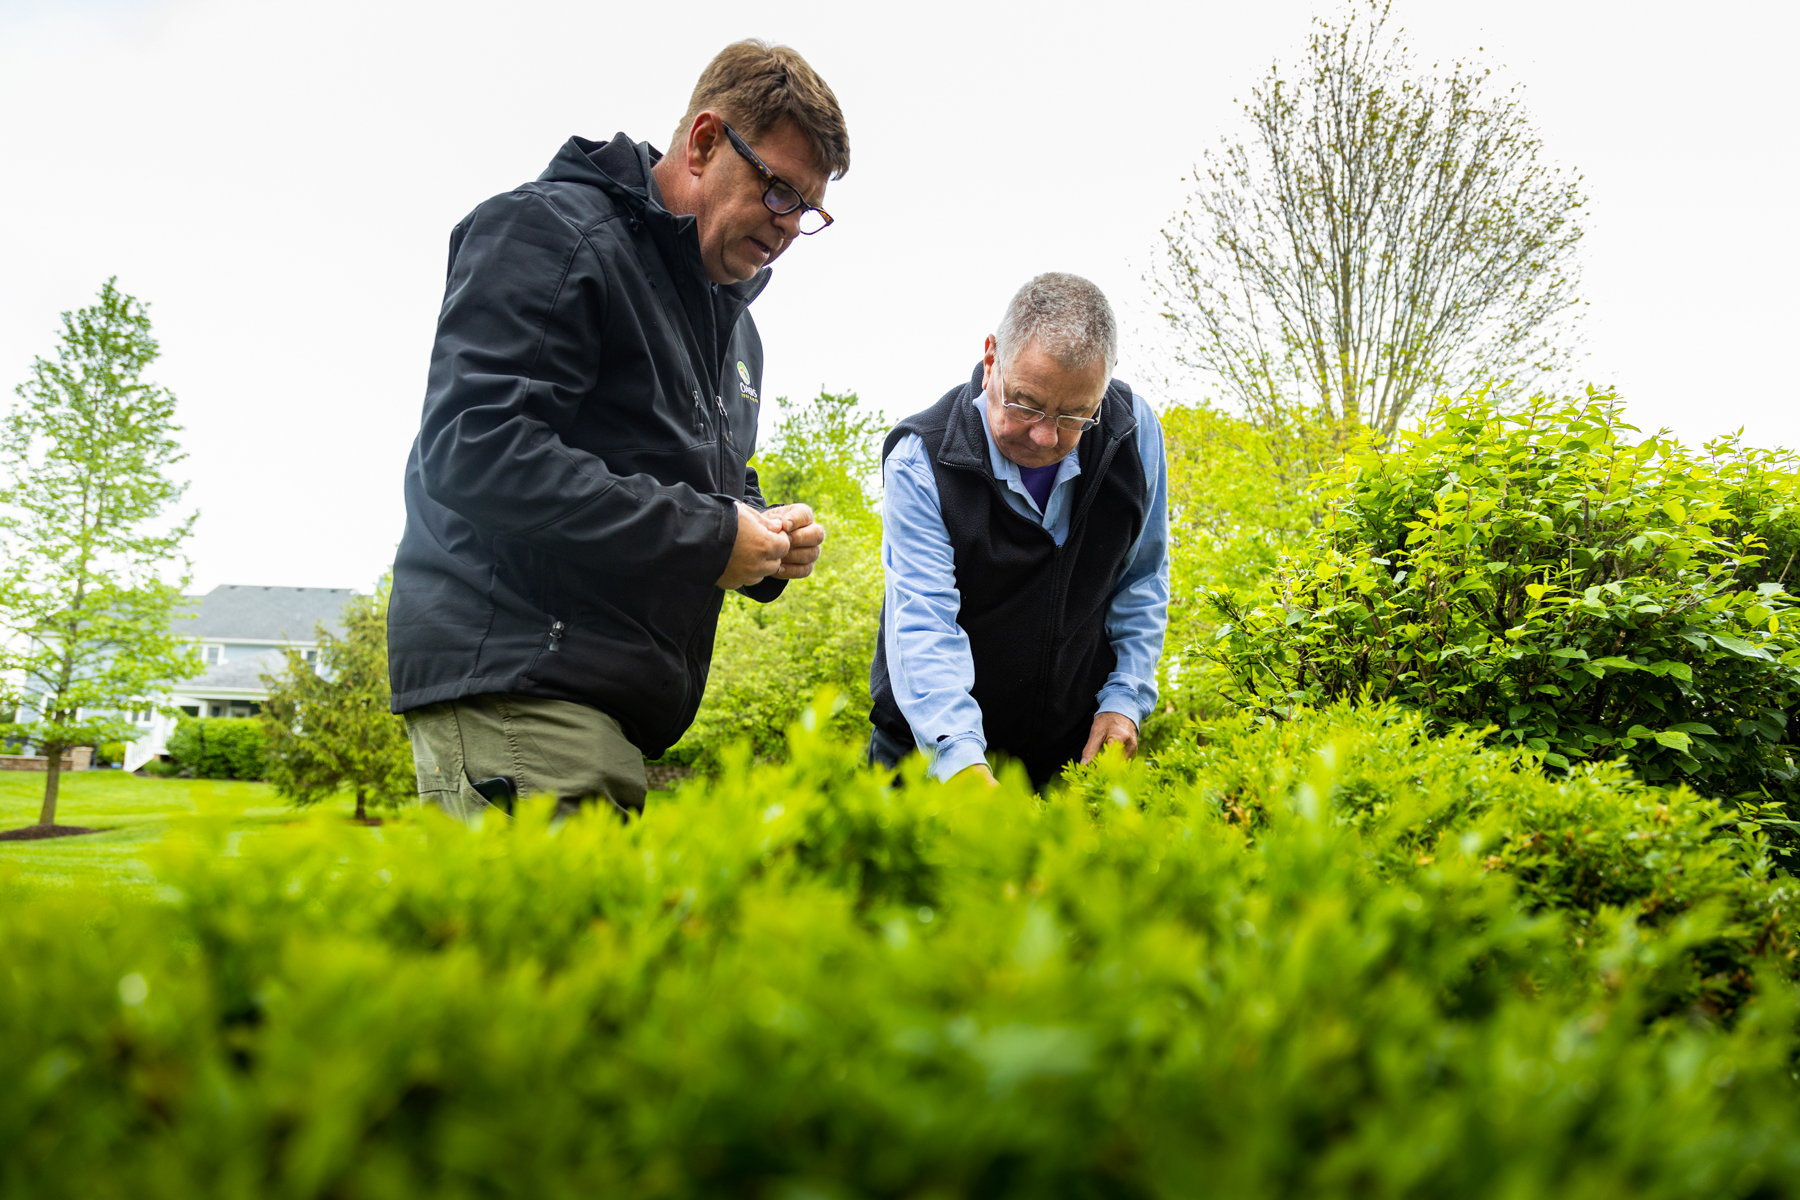 plant health care technician inspecting shrubs with customer 